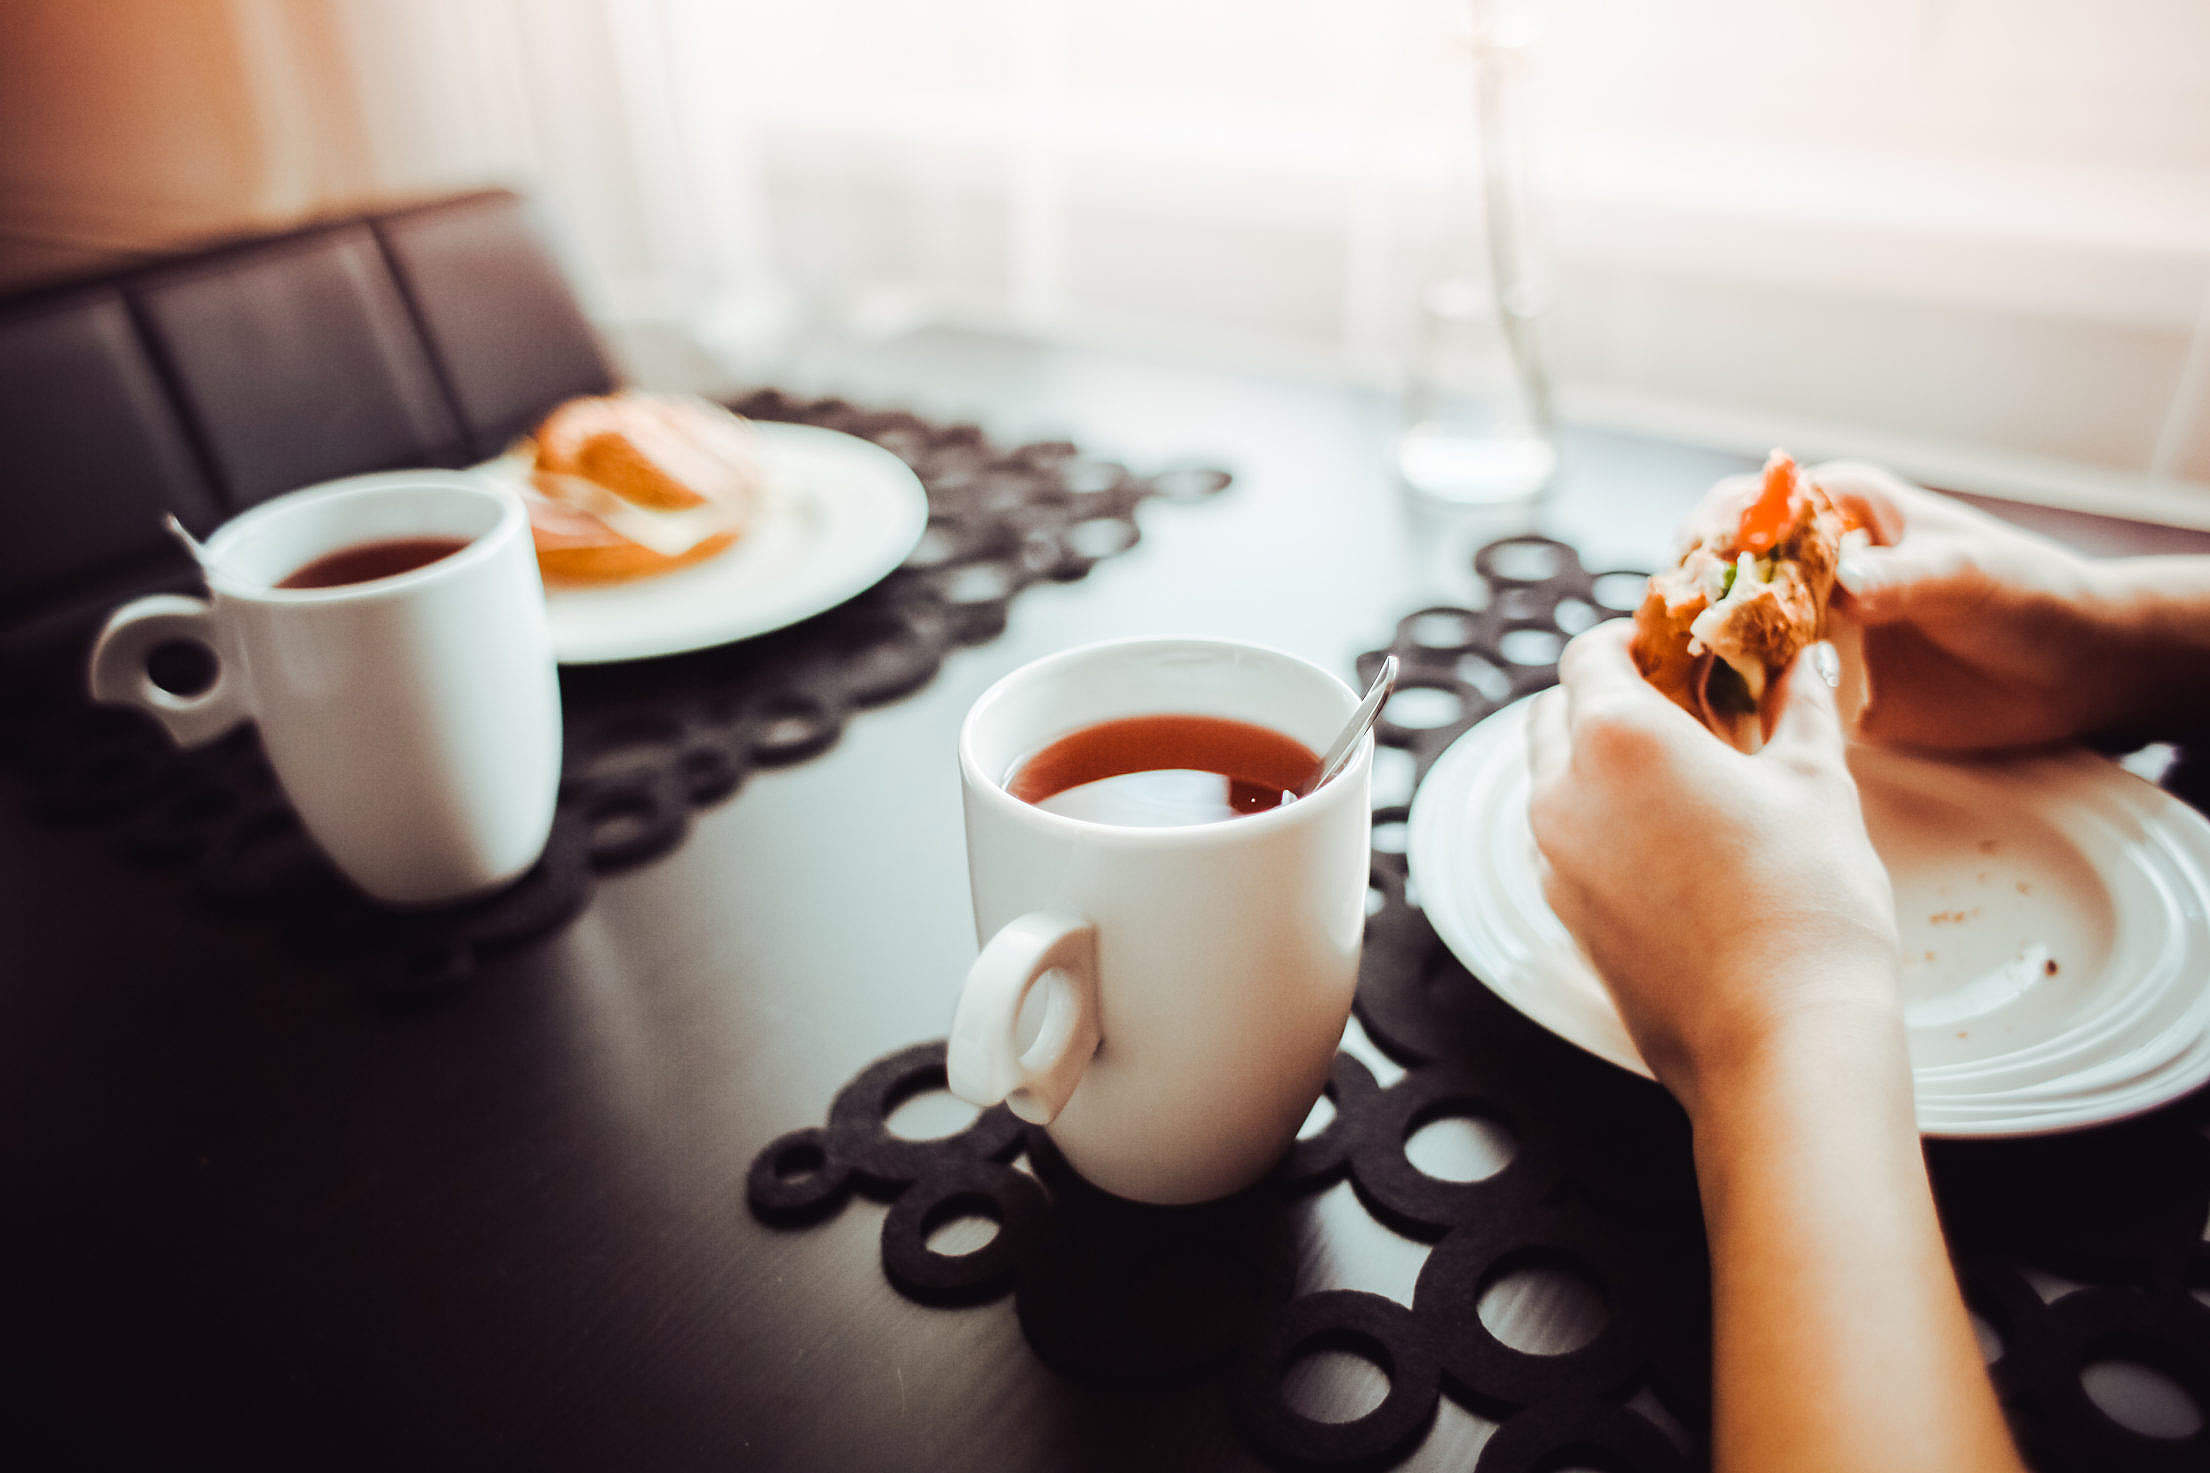 Healthy Morning Snack with a Tea Free Stock Photo